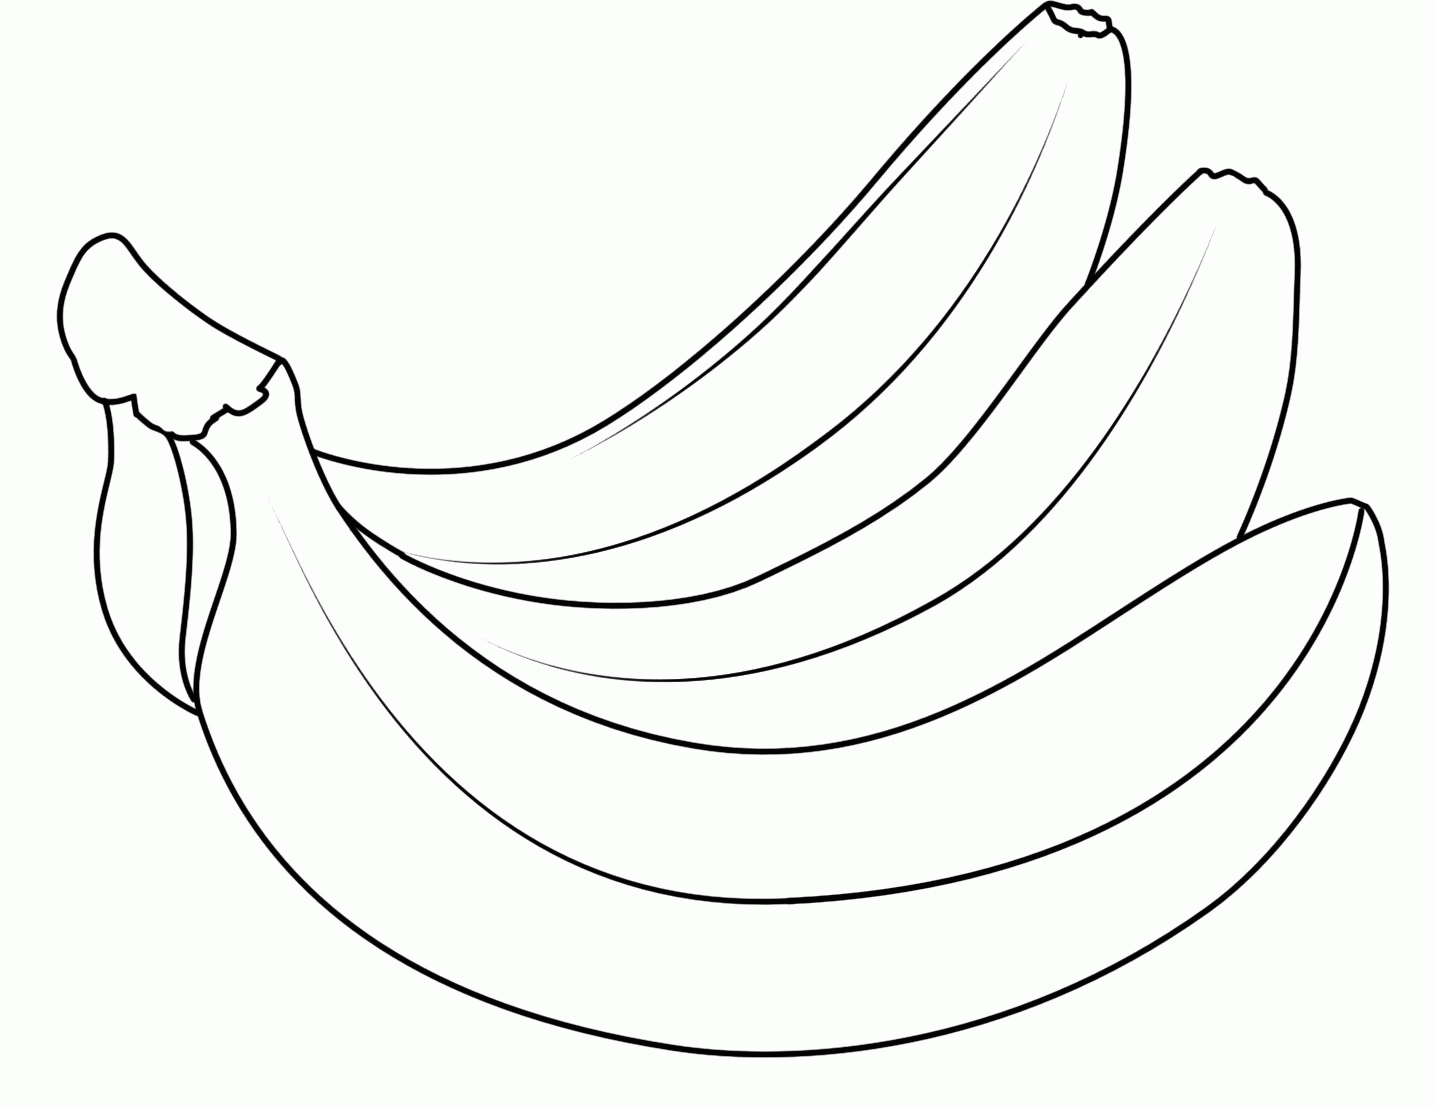 Unparalleled coloring picture of. Bananas clipart black and white